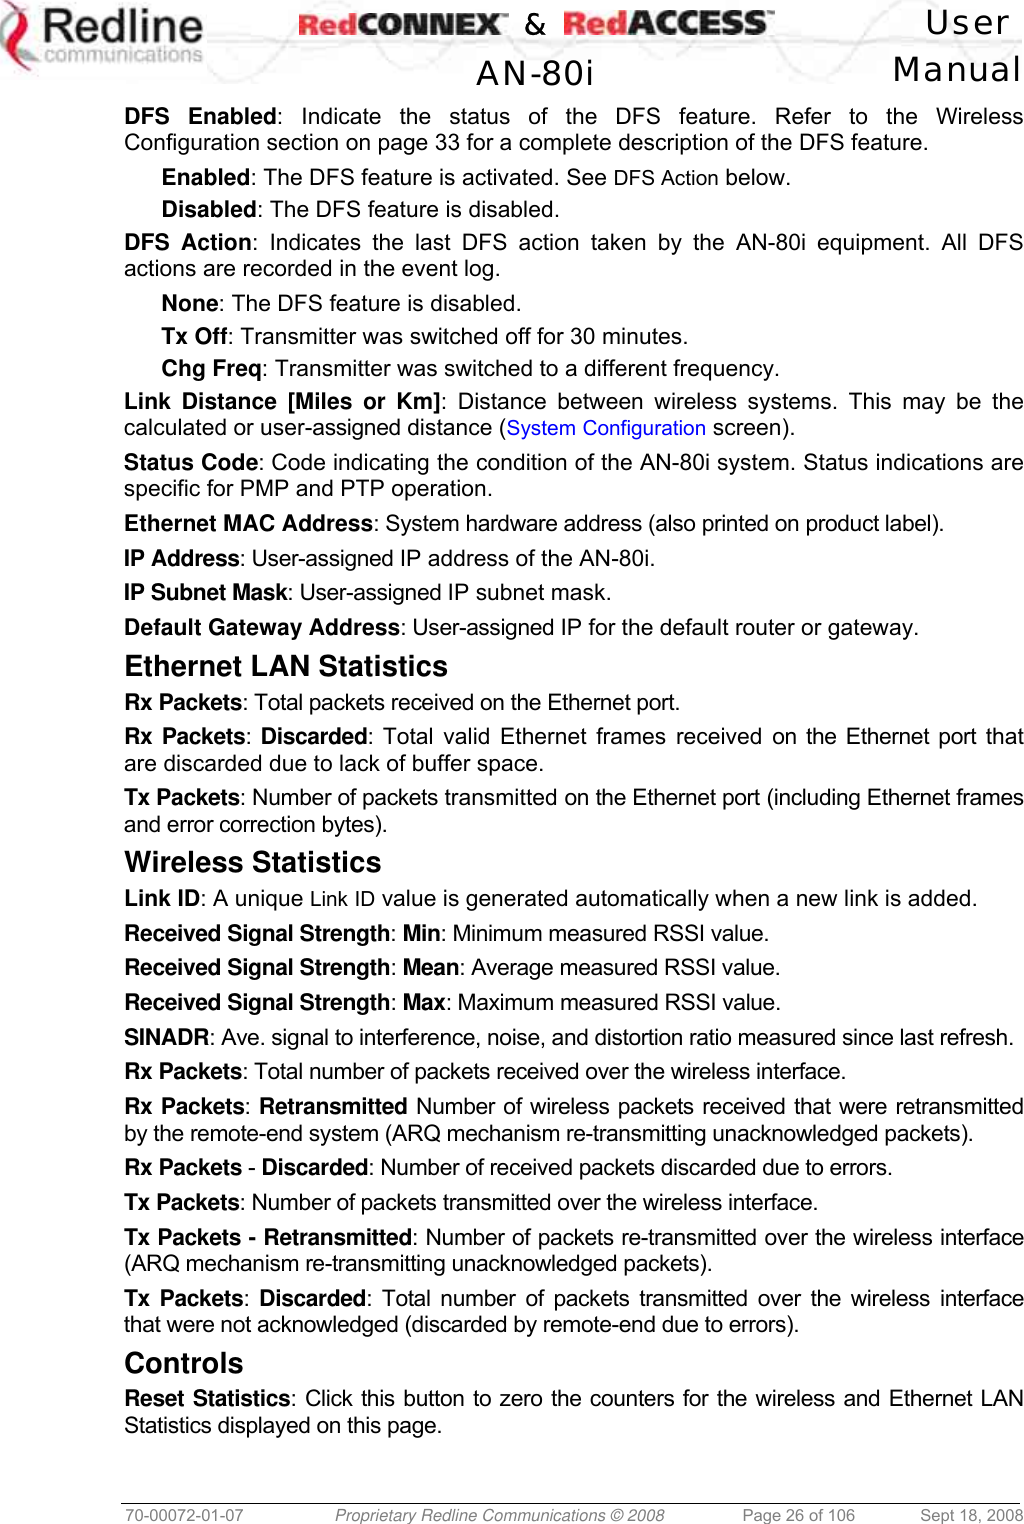    &amp;  User  AN-80i Manual  70-00072-01-07  Proprietary Redline Communications © 2008  Page 26 of 106  Sept 18, 2008 DFS Enabled: Indicate the status of the DFS feature. Refer to the Wireless Configuration section on page 33 for a complete description of the DFS feature. Enabled: The DFS feature is activated. See DFS Action below. Disabled: The DFS feature is disabled. DFS Action: Indicates the last DFS action taken by the AN-80i equipment. All DFS actions are recorded in the event log. None: The DFS feature is disabled. Tx Off: Transmitter was switched off for 30 minutes. Chg Freq: Transmitter was switched to a different frequency. Link Distance [Miles or Km]: Distance between wireless systems. This may be the calculated or user-assigned distance (System Configuration screen). Status Code: Code indicating the condition of the AN-80i system. Status indications are specific for PMP and PTP operation. Ethernet MAC Address: System hardware address (also printed on product label). IP Address: User-assigned IP address of the AN-80i. IP Subnet Mask: User-assigned IP subnet mask. Default Gateway Address: User-assigned IP for the default router or gateway. Ethernet LAN Statistics Rx Packets: Total packets received on the Ethernet port. Rx Packets: Discarded: Total valid Ethernet frames received on the Ethernet port that are discarded due to lack of buffer space. Tx Packets: Number of packets transmitted on the Ethernet port (including Ethernet frames and error correction bytes). Wireless Statistics Link ID: A unique Link ID value is generated automatically when a new link is added. Received Signal Strength: Min: Minimum measured RSSI value. Received Signal Strength: Mean: Average measured RSSI value. Received Signal Strength: Max: Maximum measured RSSI value. SINADR: Ave. signal to interference, noise, and distortion ratio measured since last refresh. Rx Packets: Total number of packets received over the wireless interface. Rx Packets: Retransmitted Number of wireless packets received that were retransmitted by the remote-end system (ARQ mechanism re-transmitting unacknowledged packets). Rx Packets - Discarded: Number of received packets discarded due to errors. Tx Packets: Number of packets transmitted over the wireless interface. Tx Packets - Retransmitted: Number of packets re-transmitted over the wireless interface (ARQ mechanism re-transmitting unacknowledged packets). Tx Packets: Discarded: Total number of packets transmitted over the wireless interface that were not acknowledged (discarded by remote-end due to errors). Controls Reset Statistics: Click this button to zero the counters for the wireless and Ethernet LAN Statistics displayed on this page. 